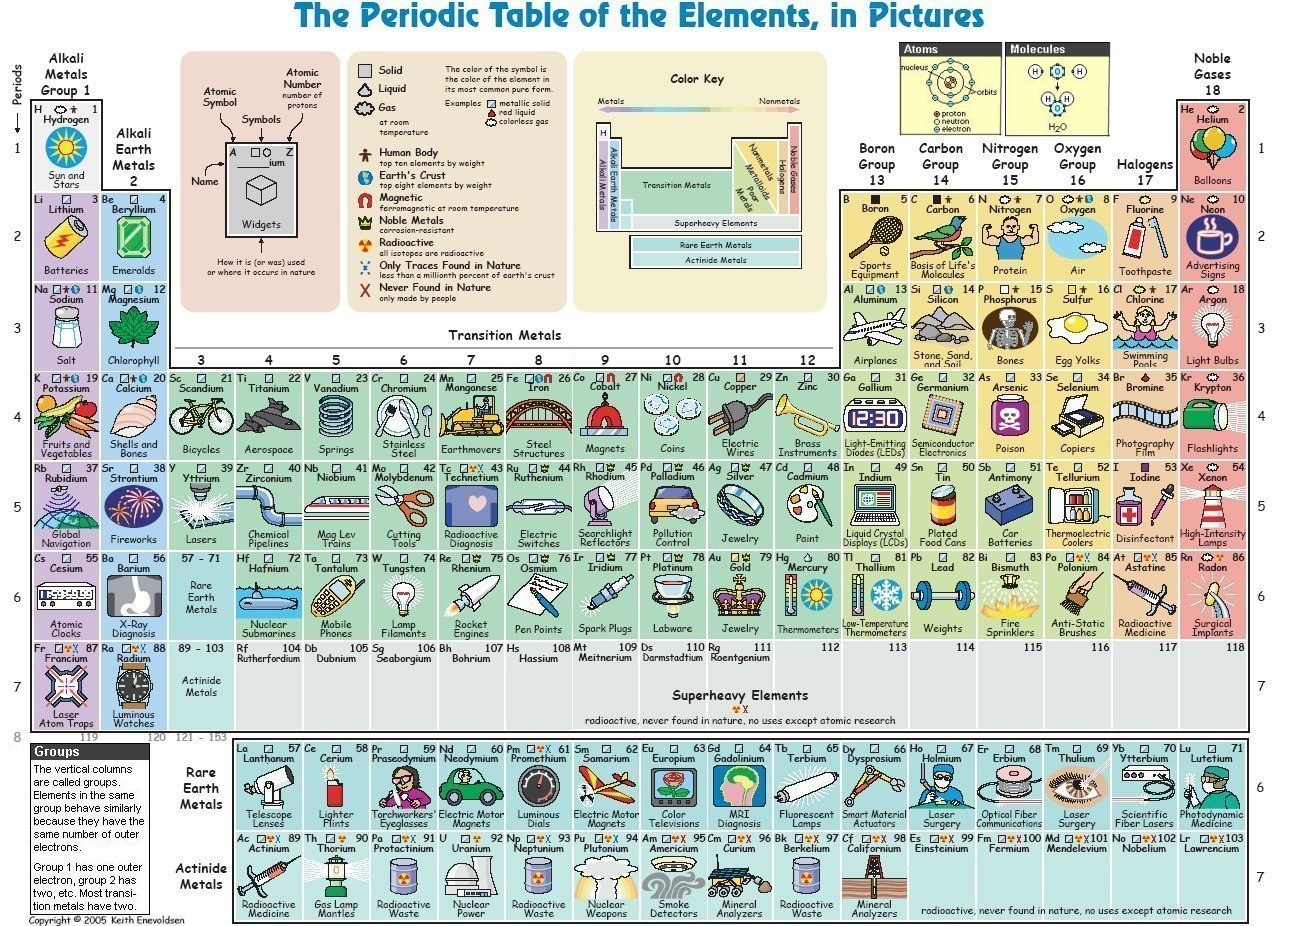 THE PERIODIC TABLE IN PICTURES